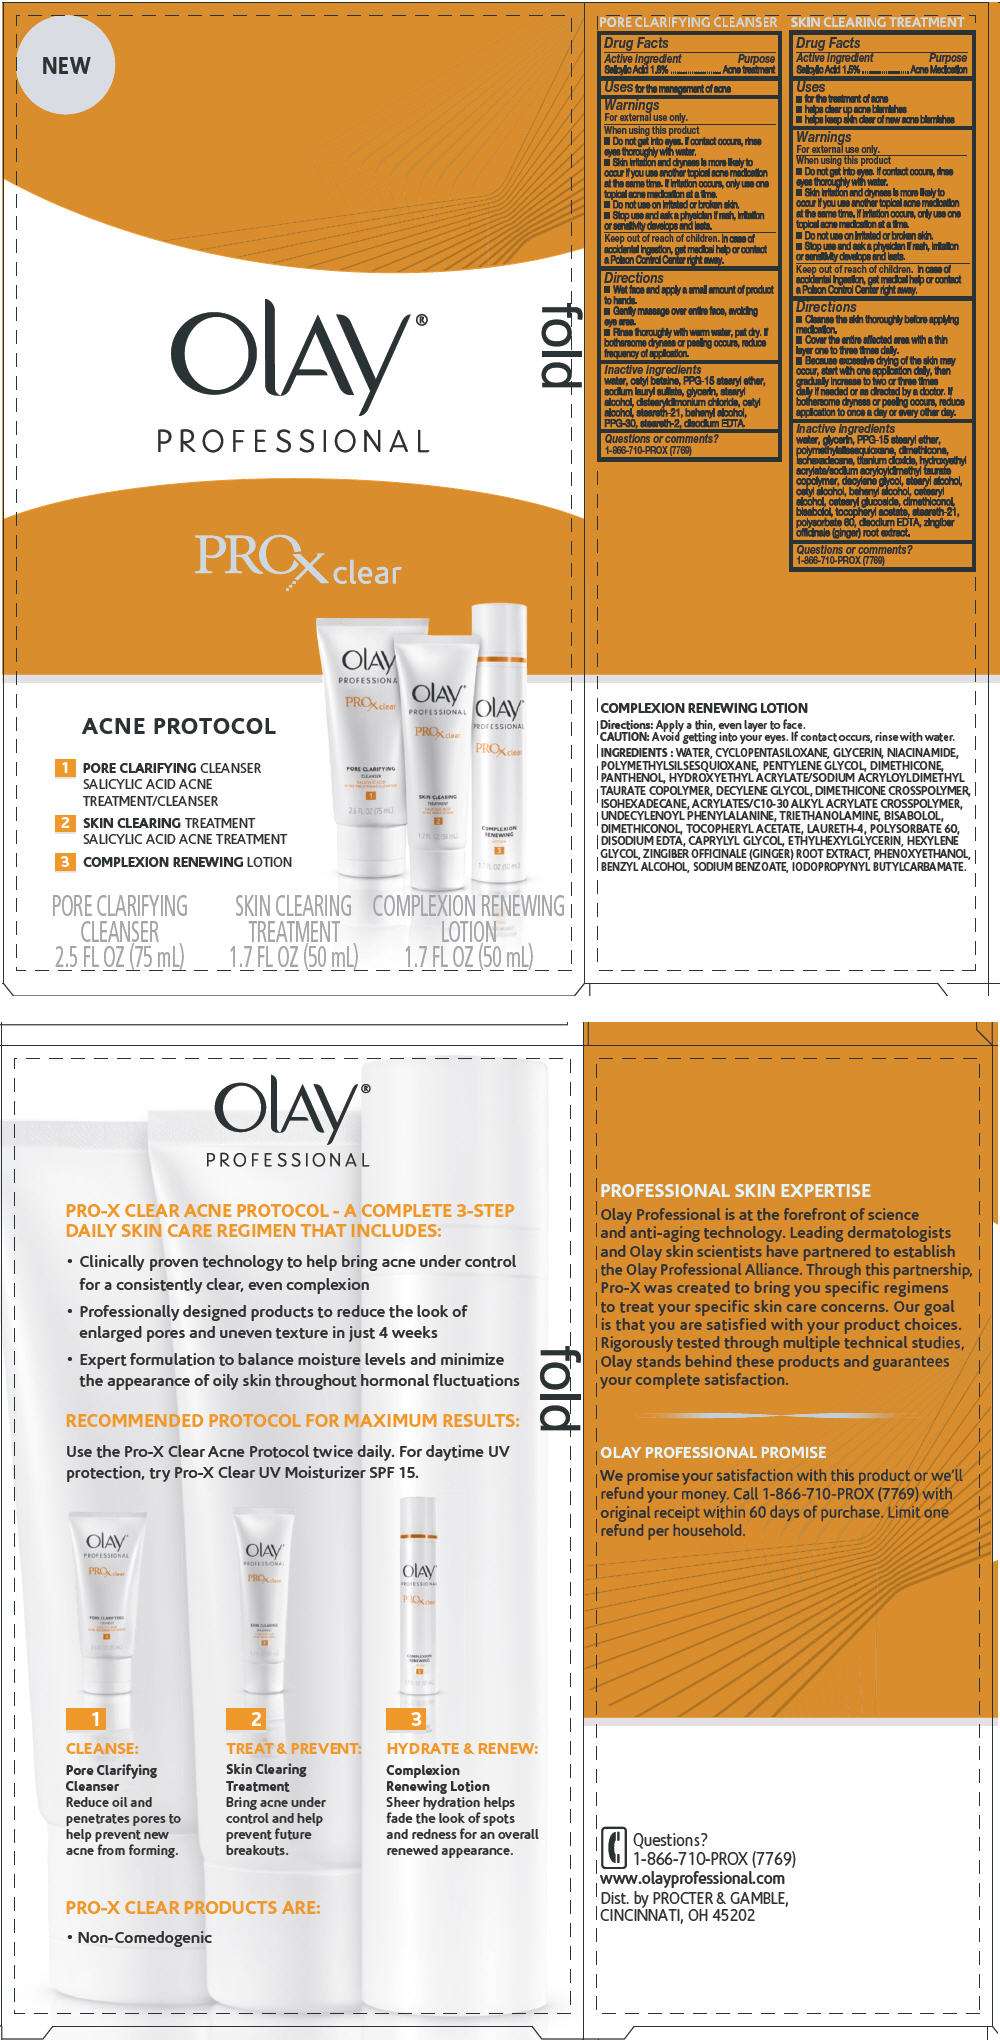 Olay Professional ProX Clear Acne Protocol